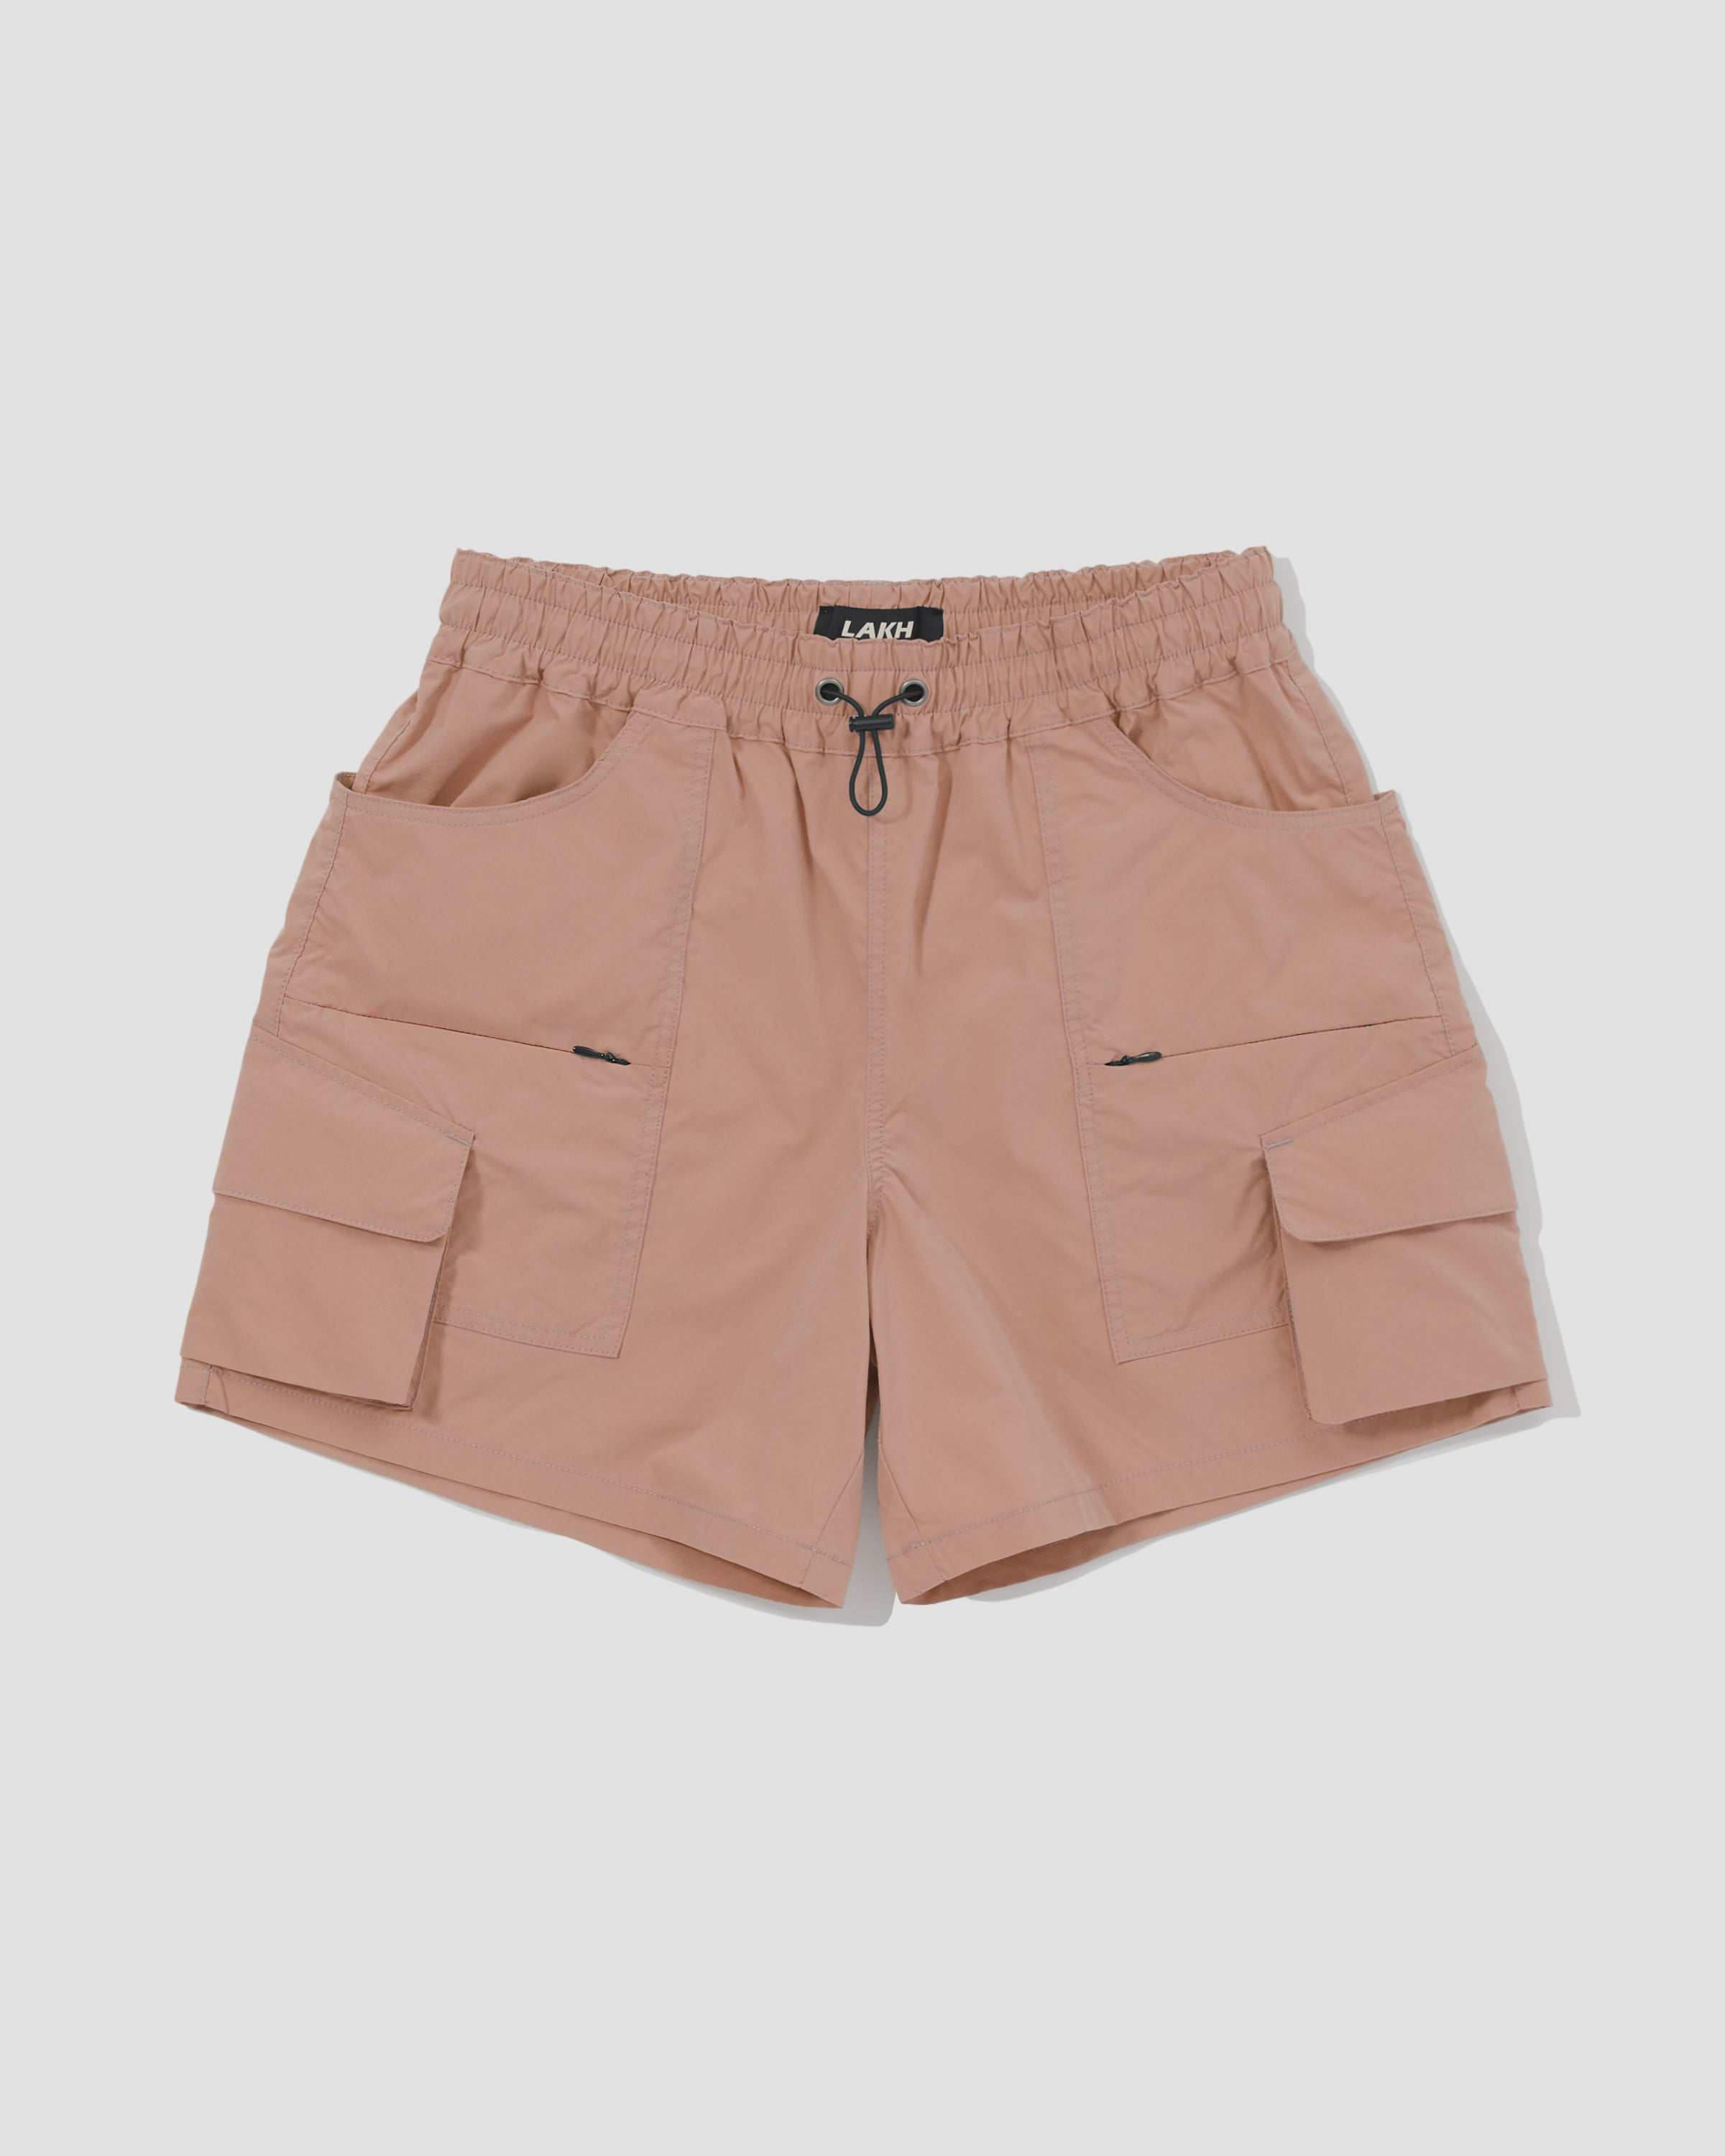 Field Shorts  - Coral